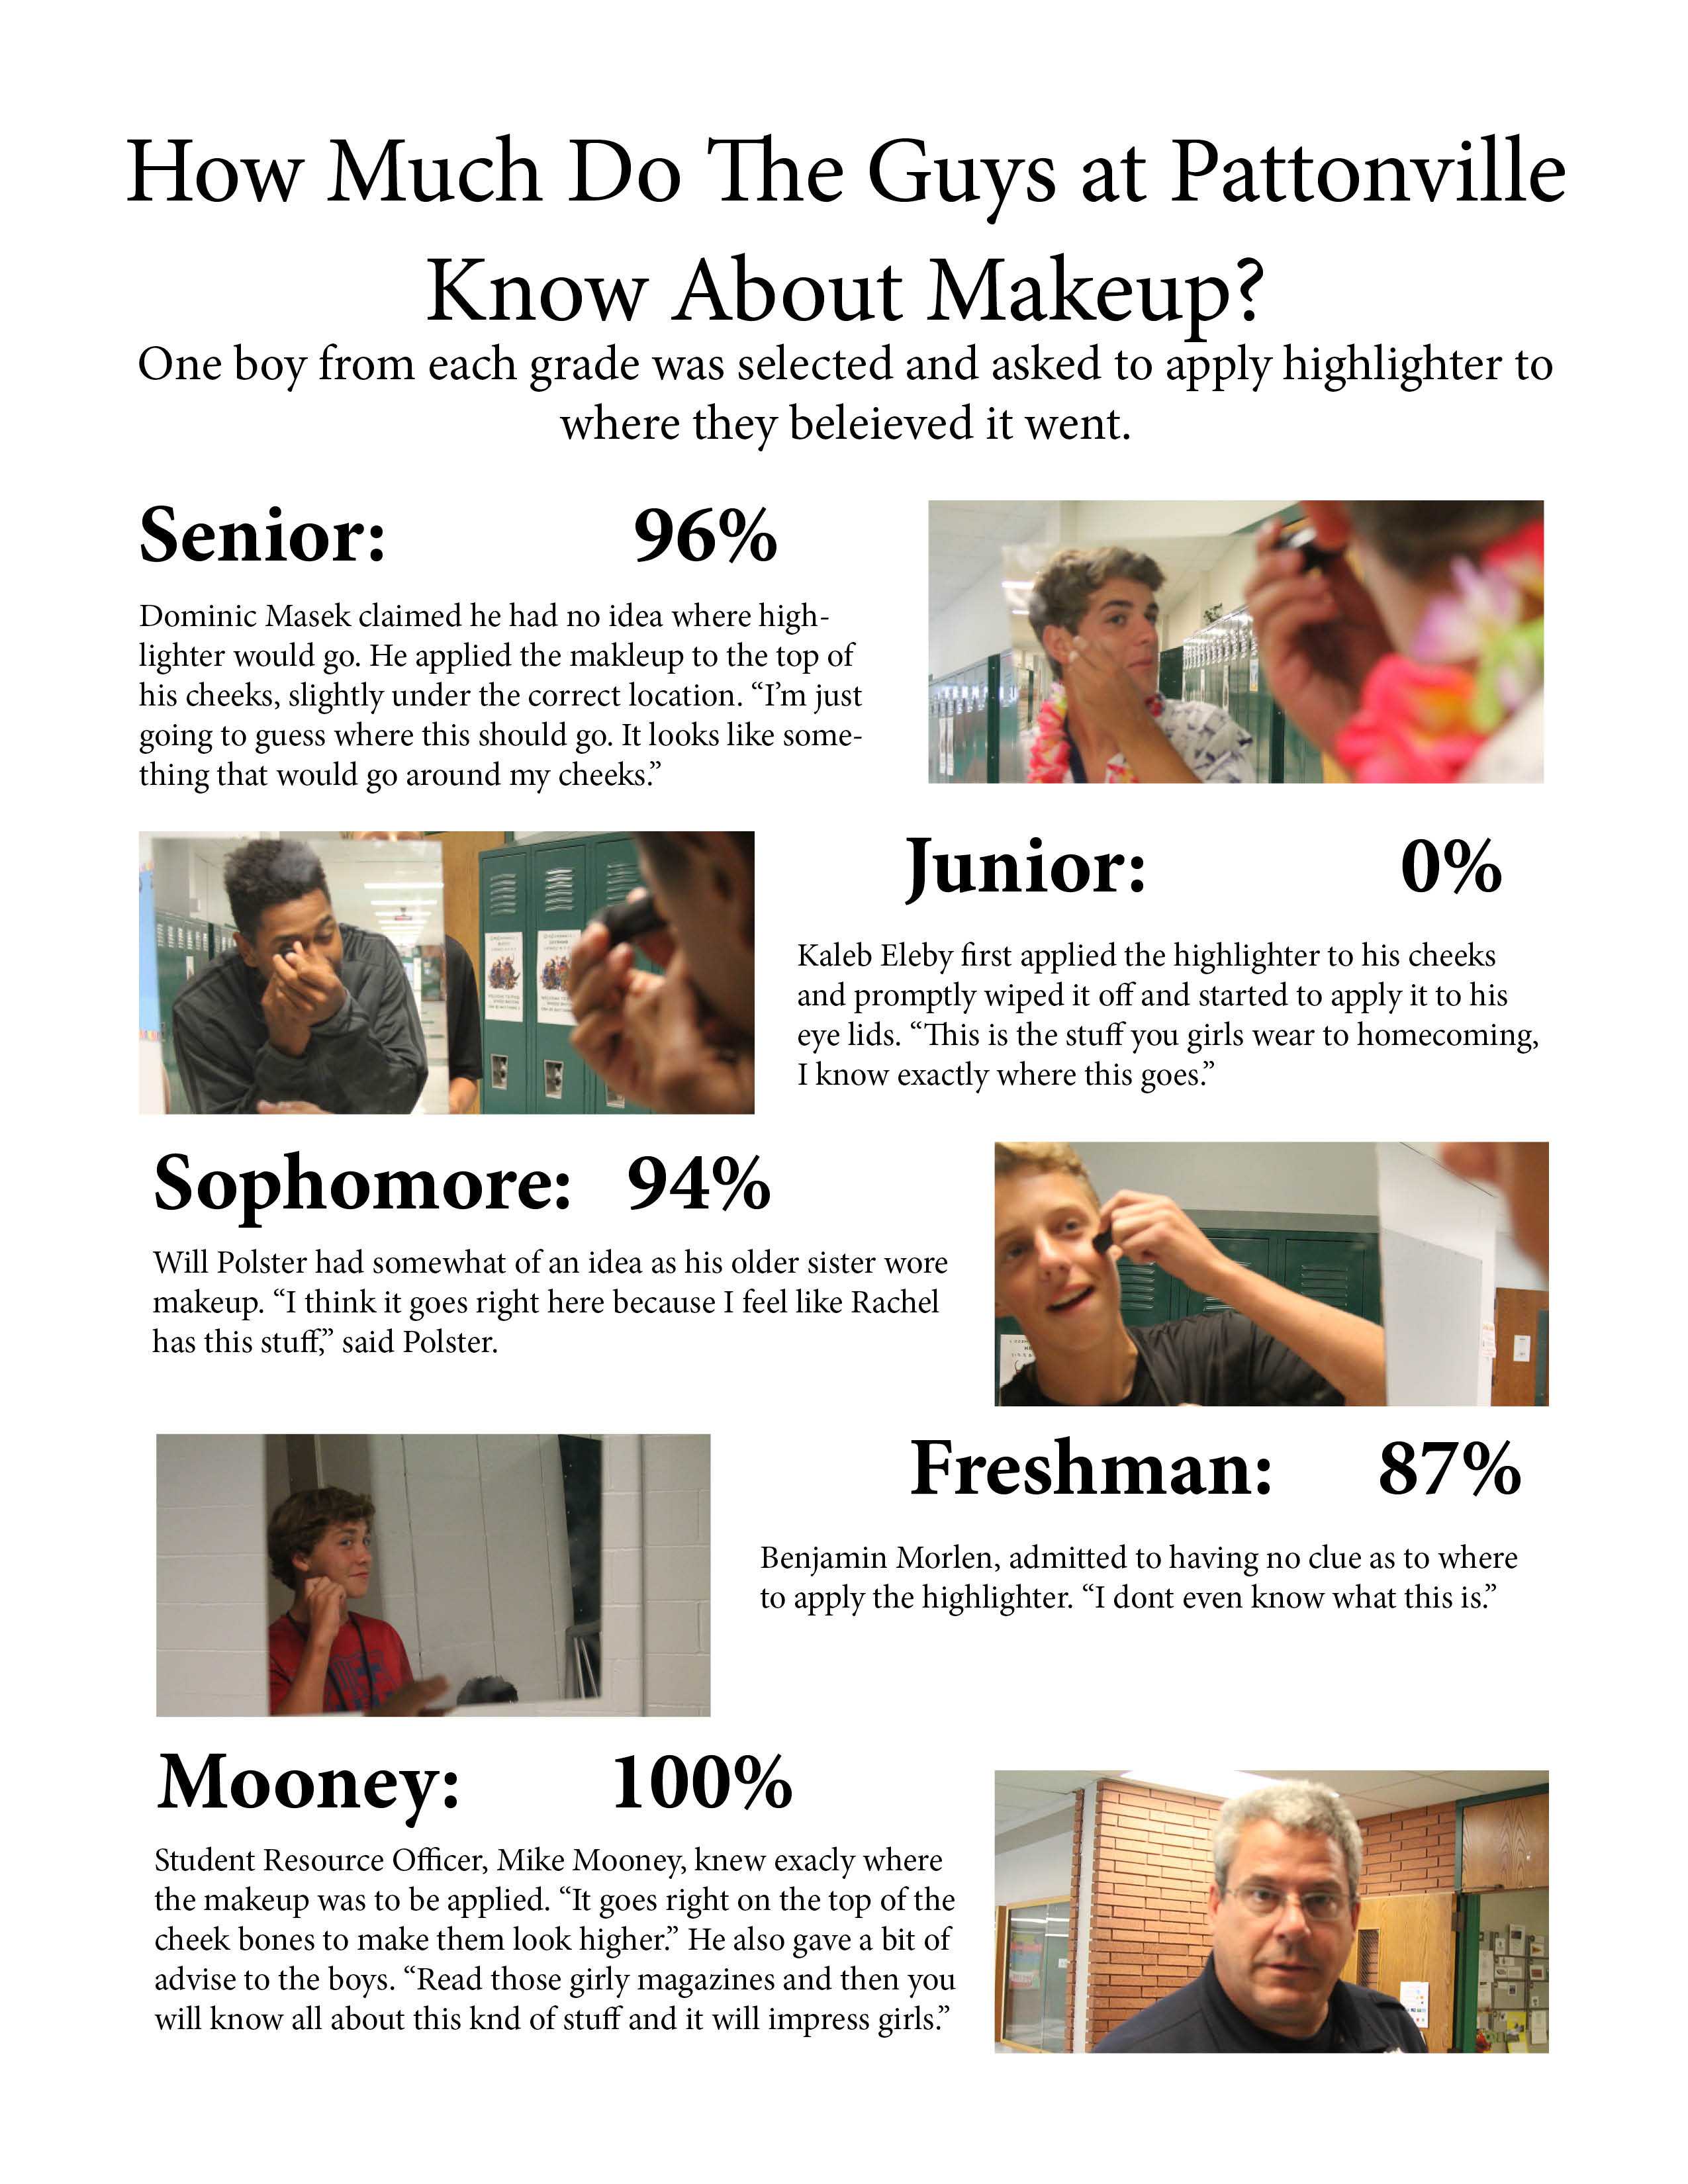 Do Pattonville Boys Know About Makeup